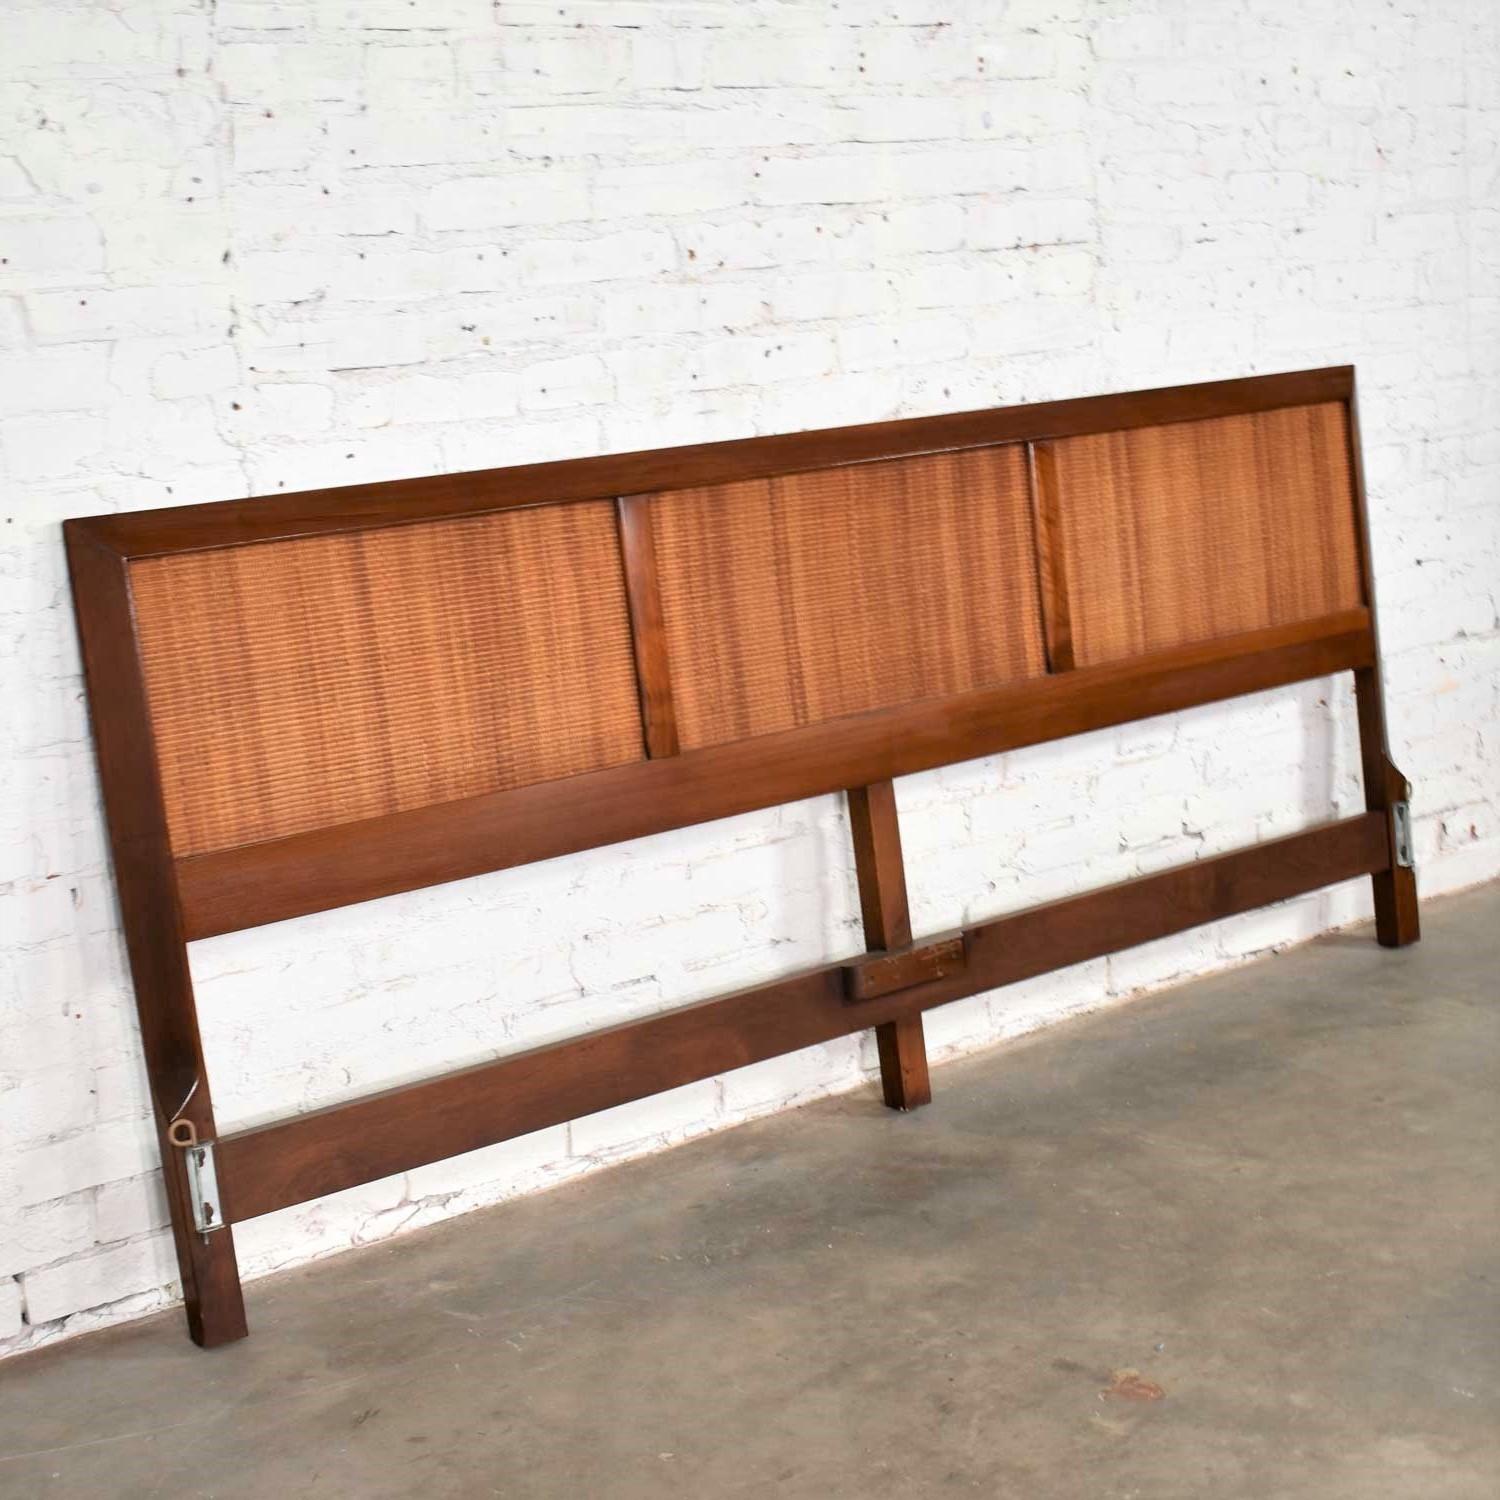 Handsome king size bed headboard from American of Martinsville and Merton Gershun’s Accord line of furniture. It is in fabulous vintage condition with its original finish. The caning is all in place and the wood looks awesome. However, it is not